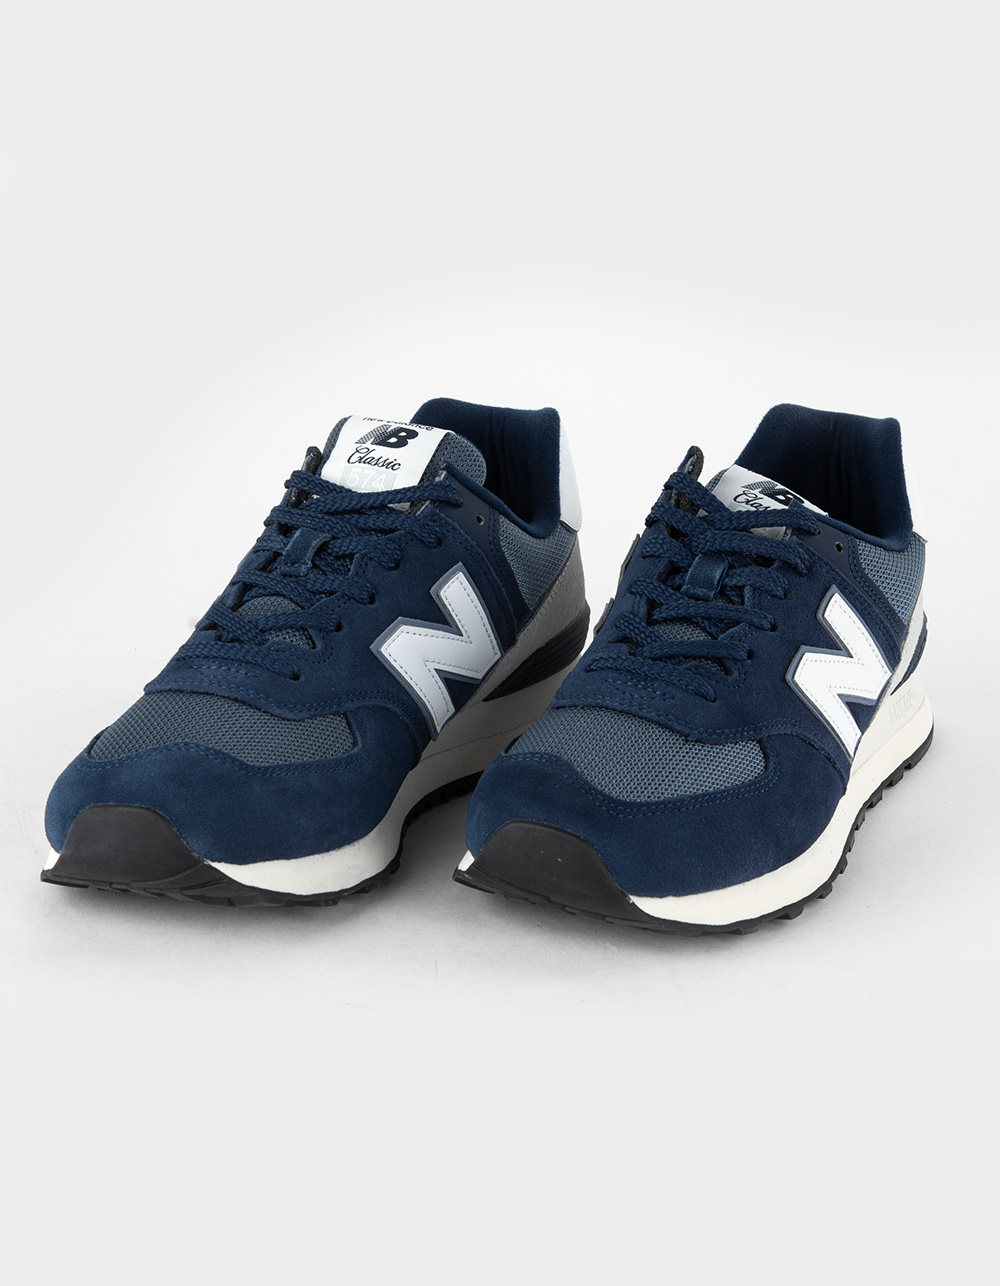 New Balance Shoes, Sneakers - Retro & Trendy | Tillys